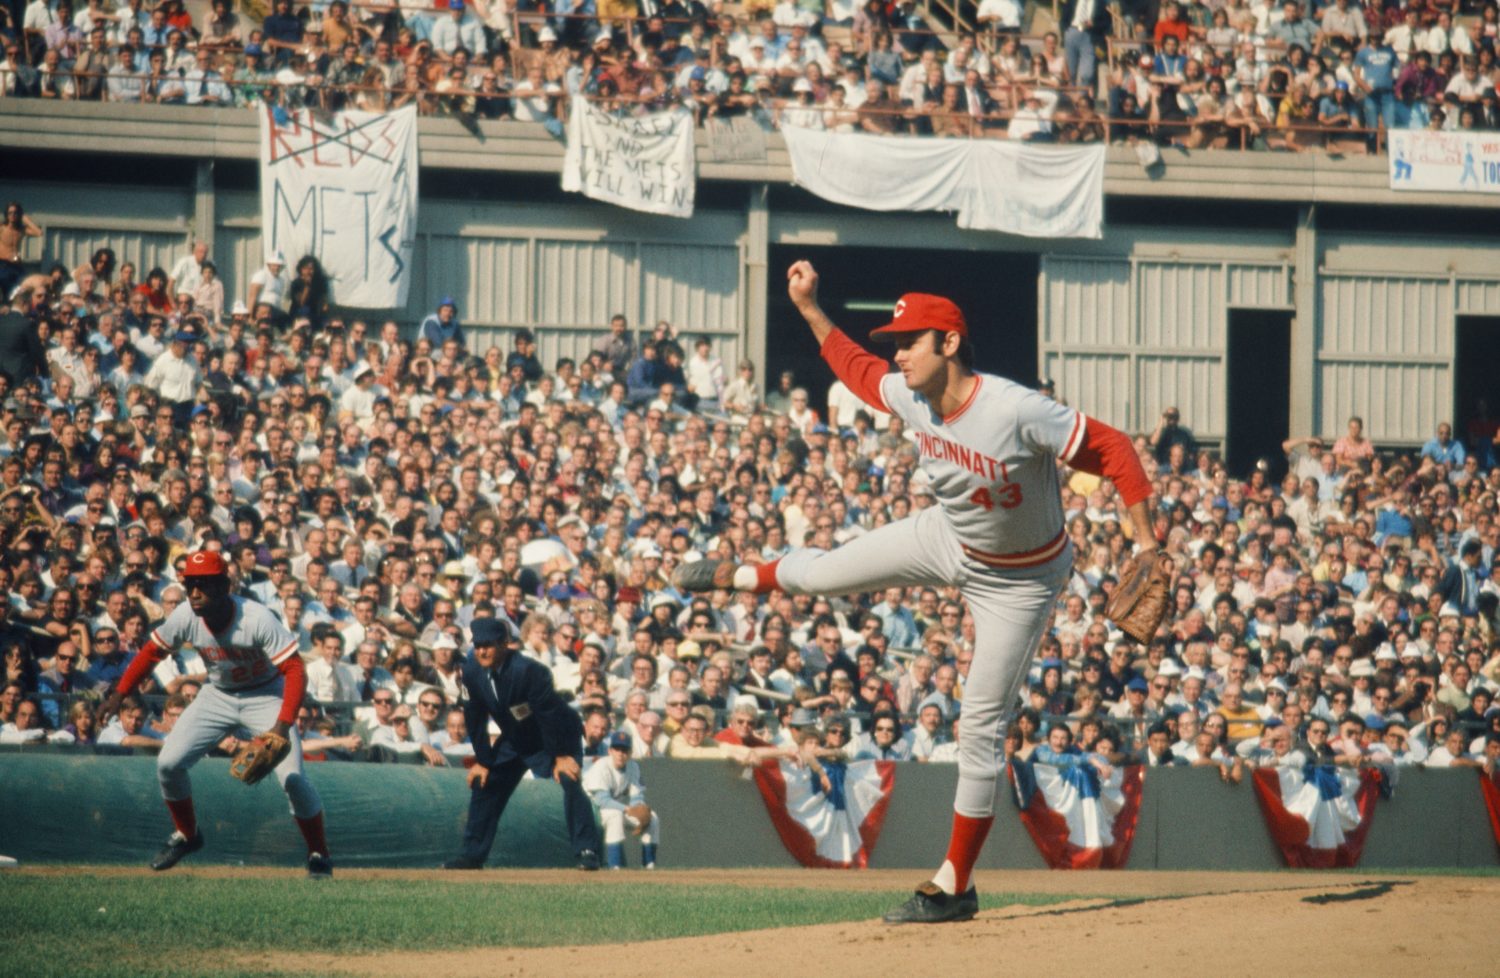 Mets Fans Support Team in 1973 NLCS As Jack Billingham Pitches for Reds